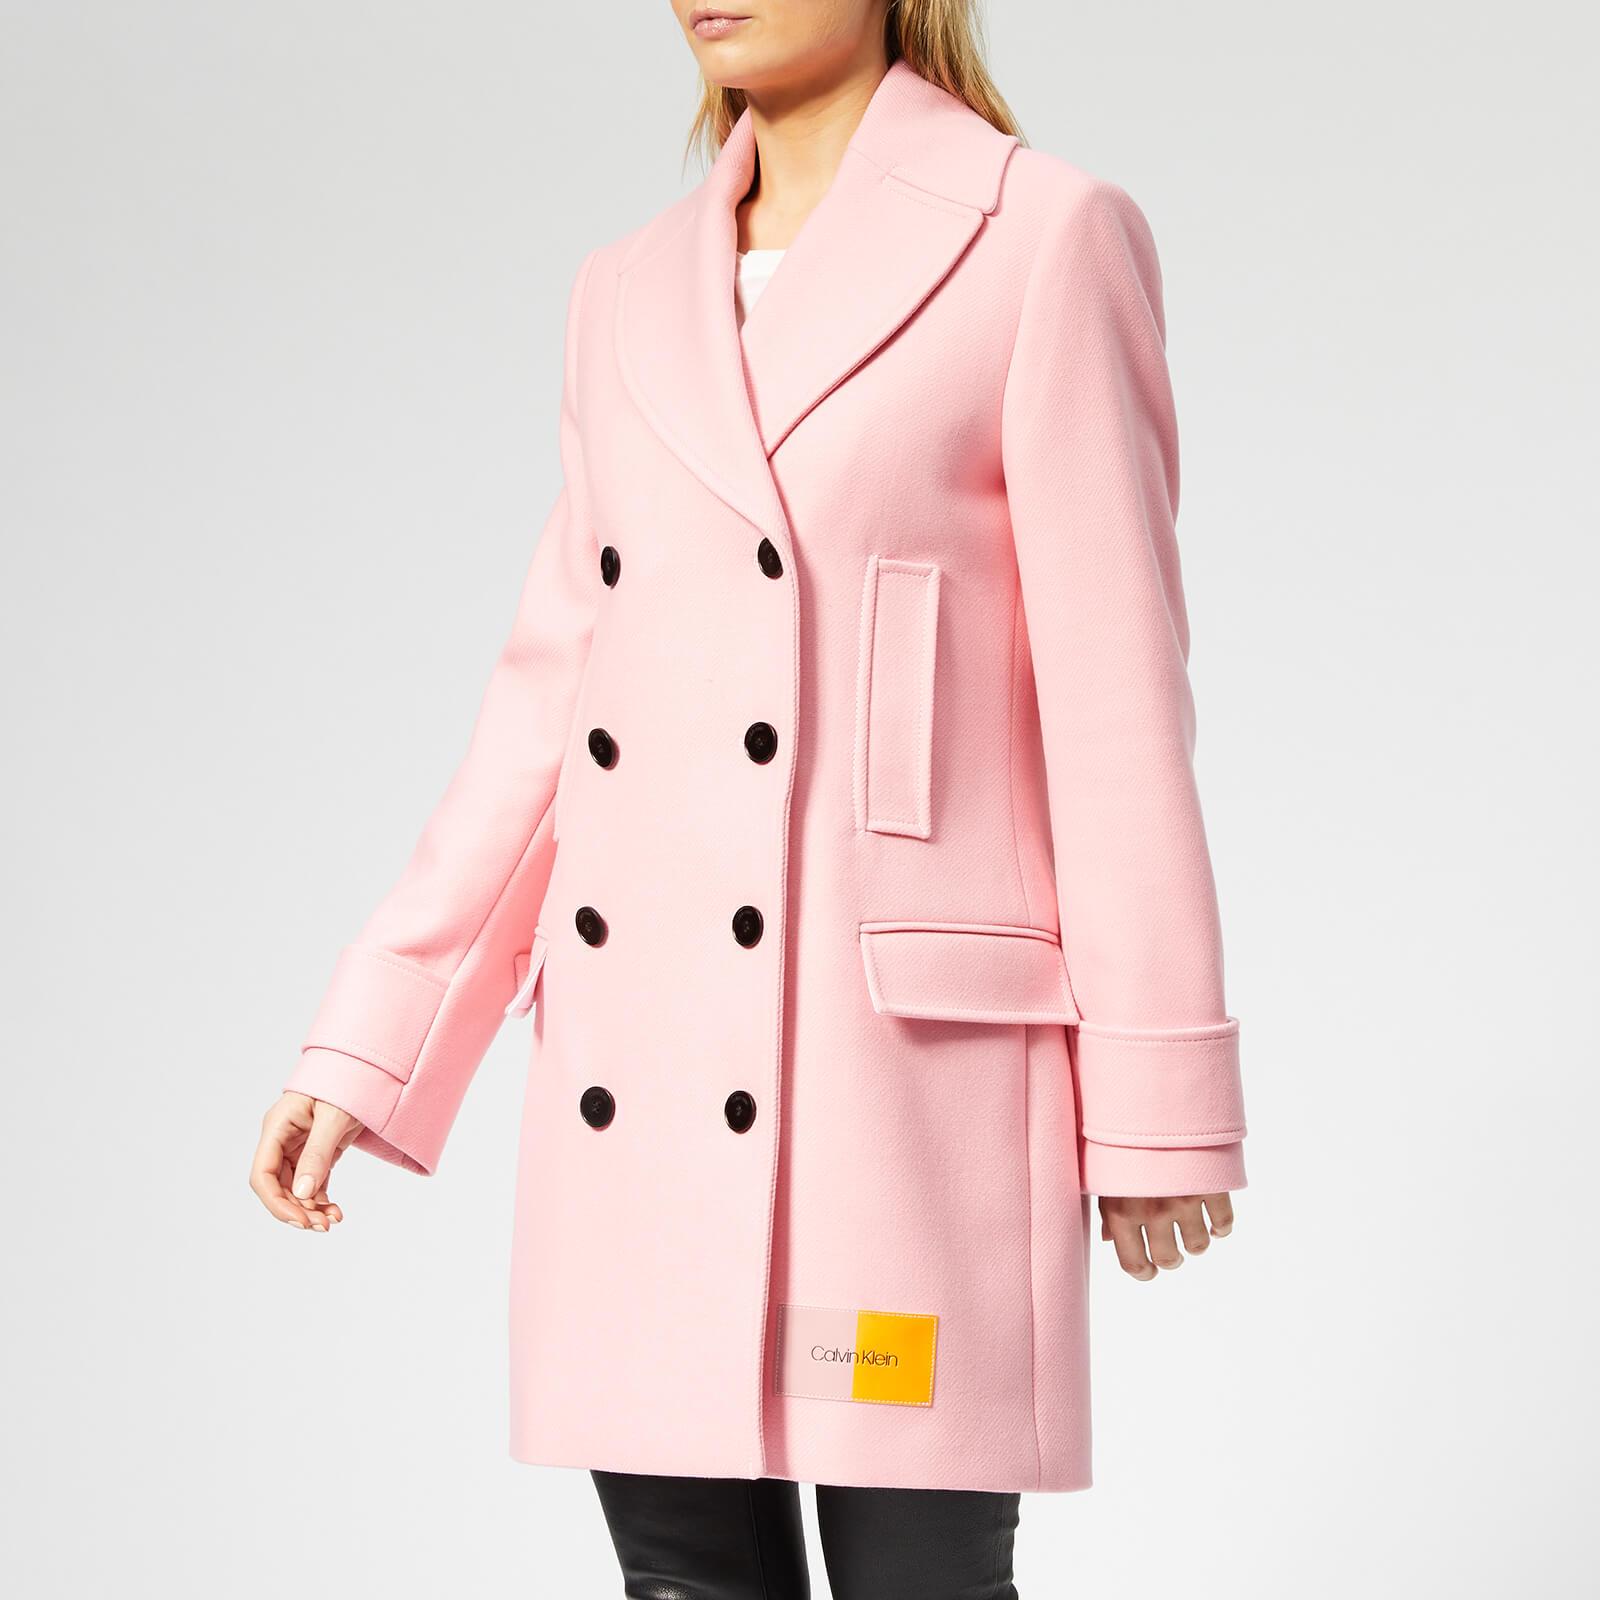 Calvin Klein Structured Wool Pea Coat in Pink - Lyst